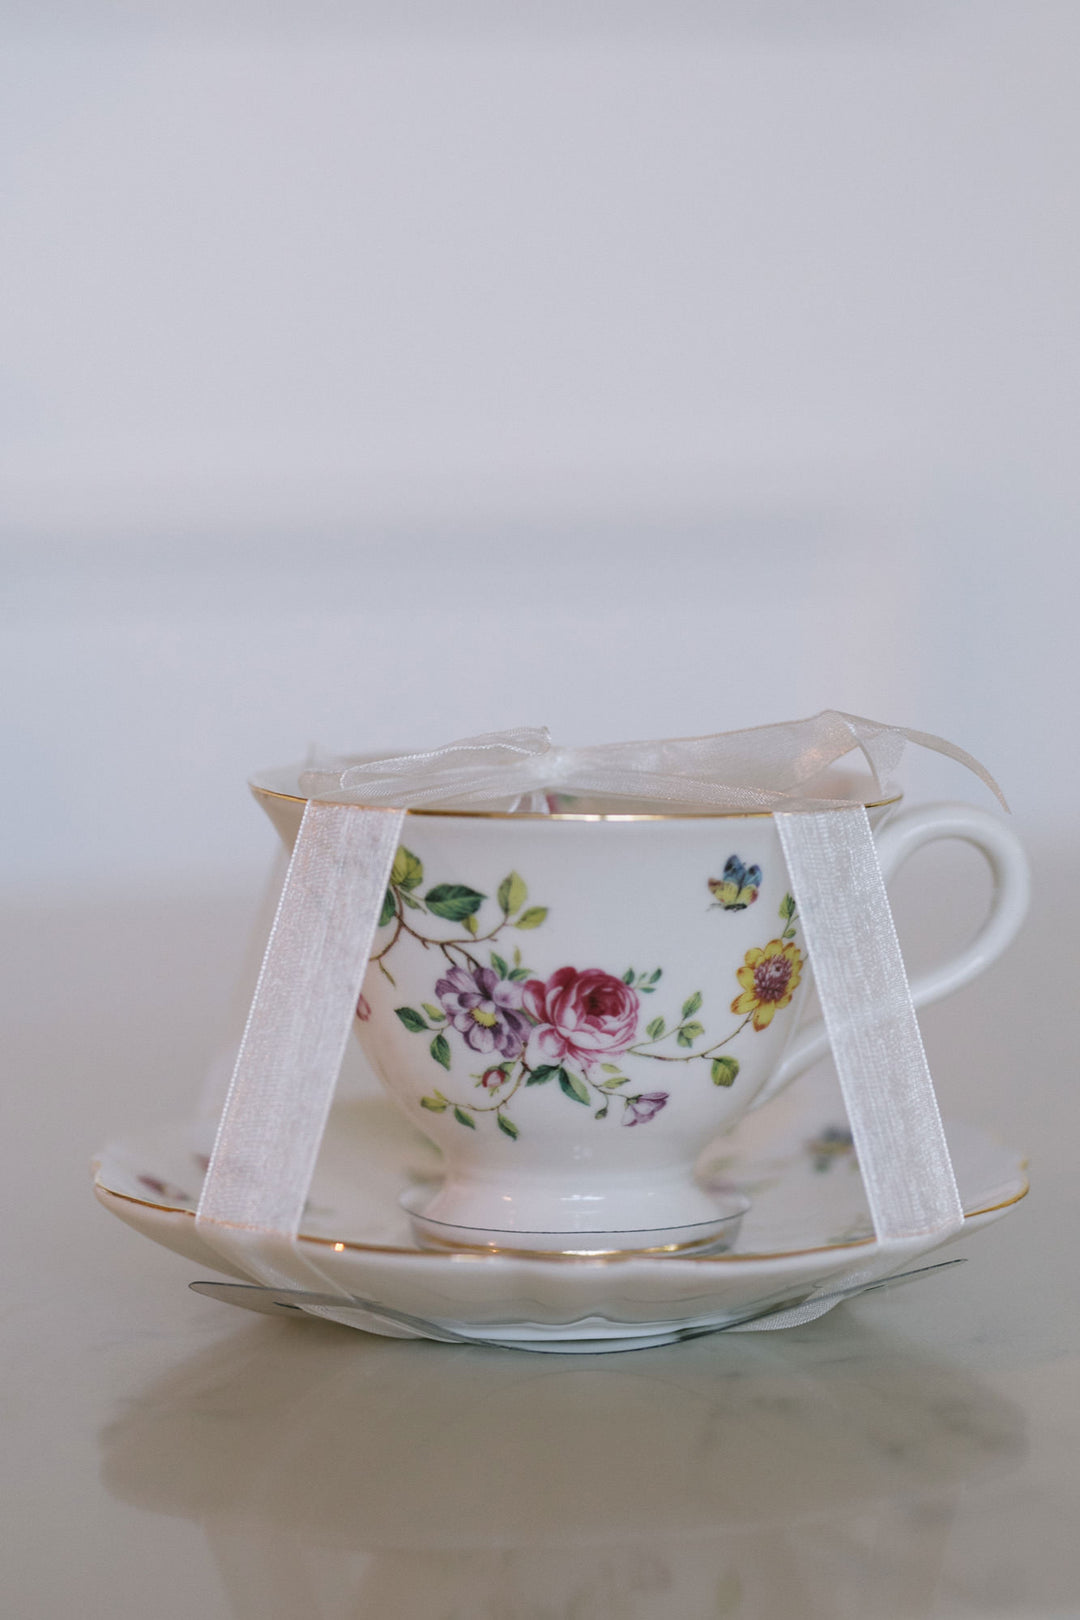 Purple Floral Tea Cups and Saucers, Set of 4